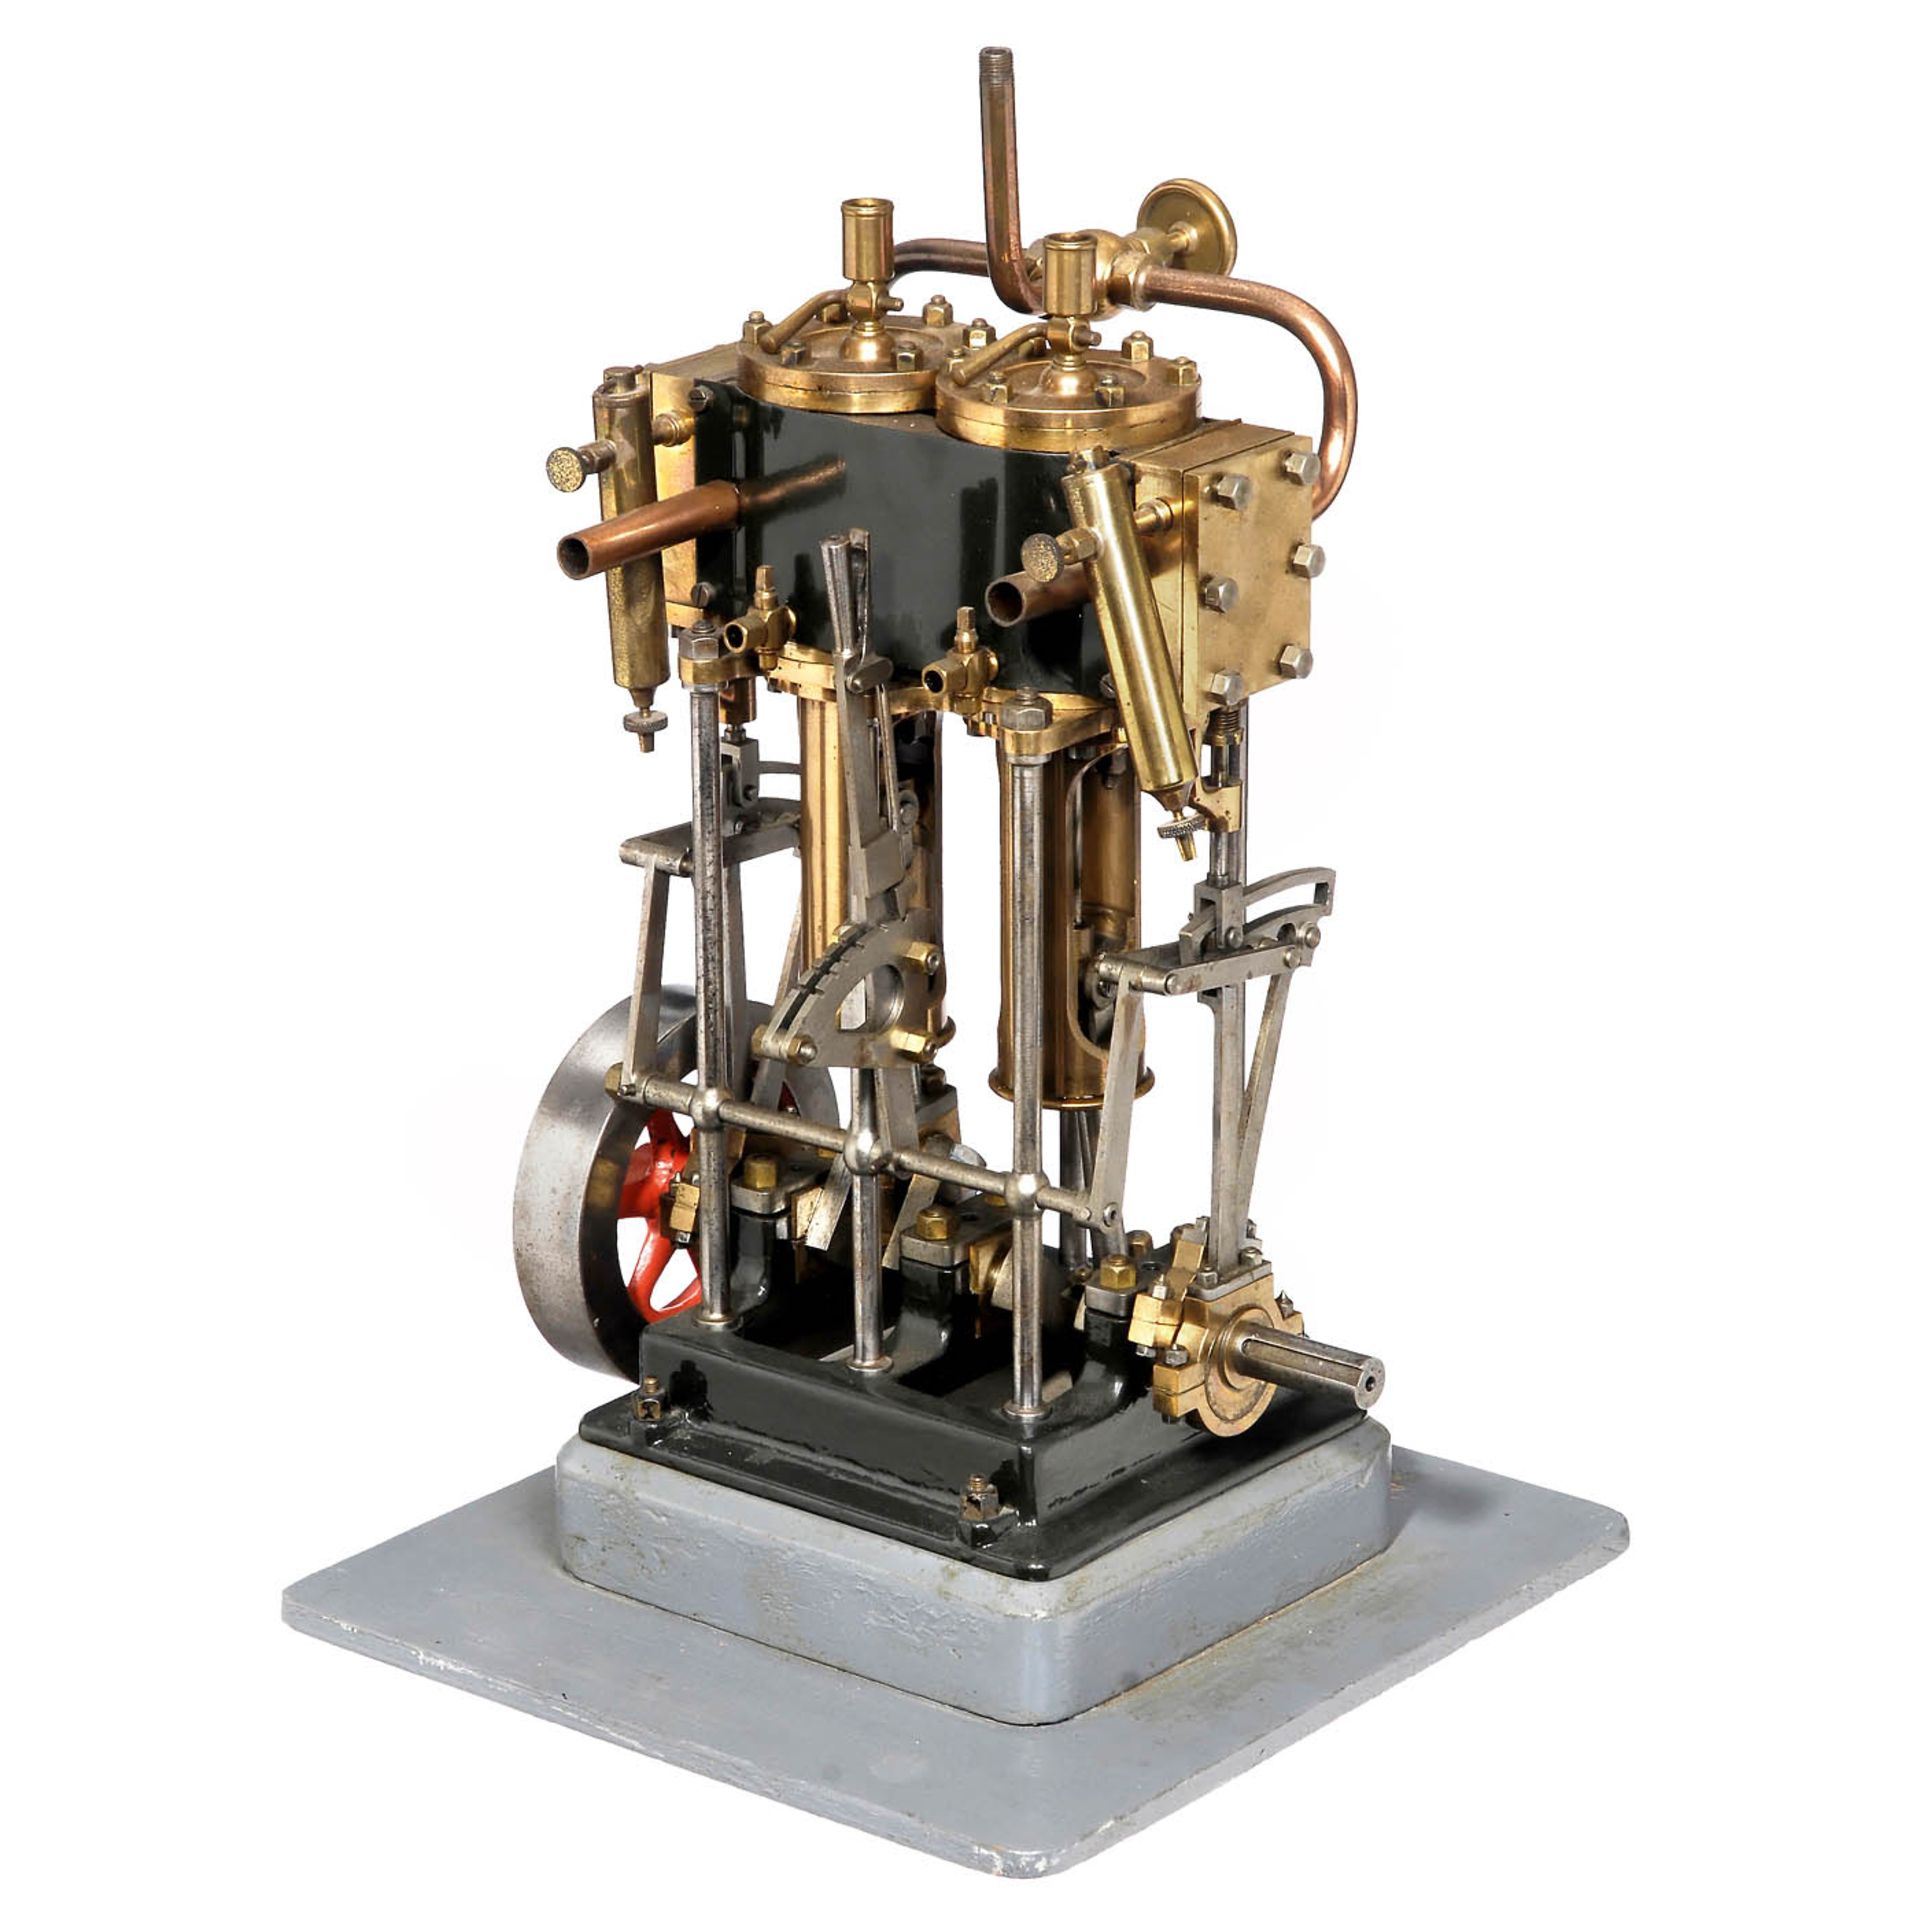 Precision Model of a Vertical Twin-Cylinder Steam Engine, c. 1960 - Image 2 of 2